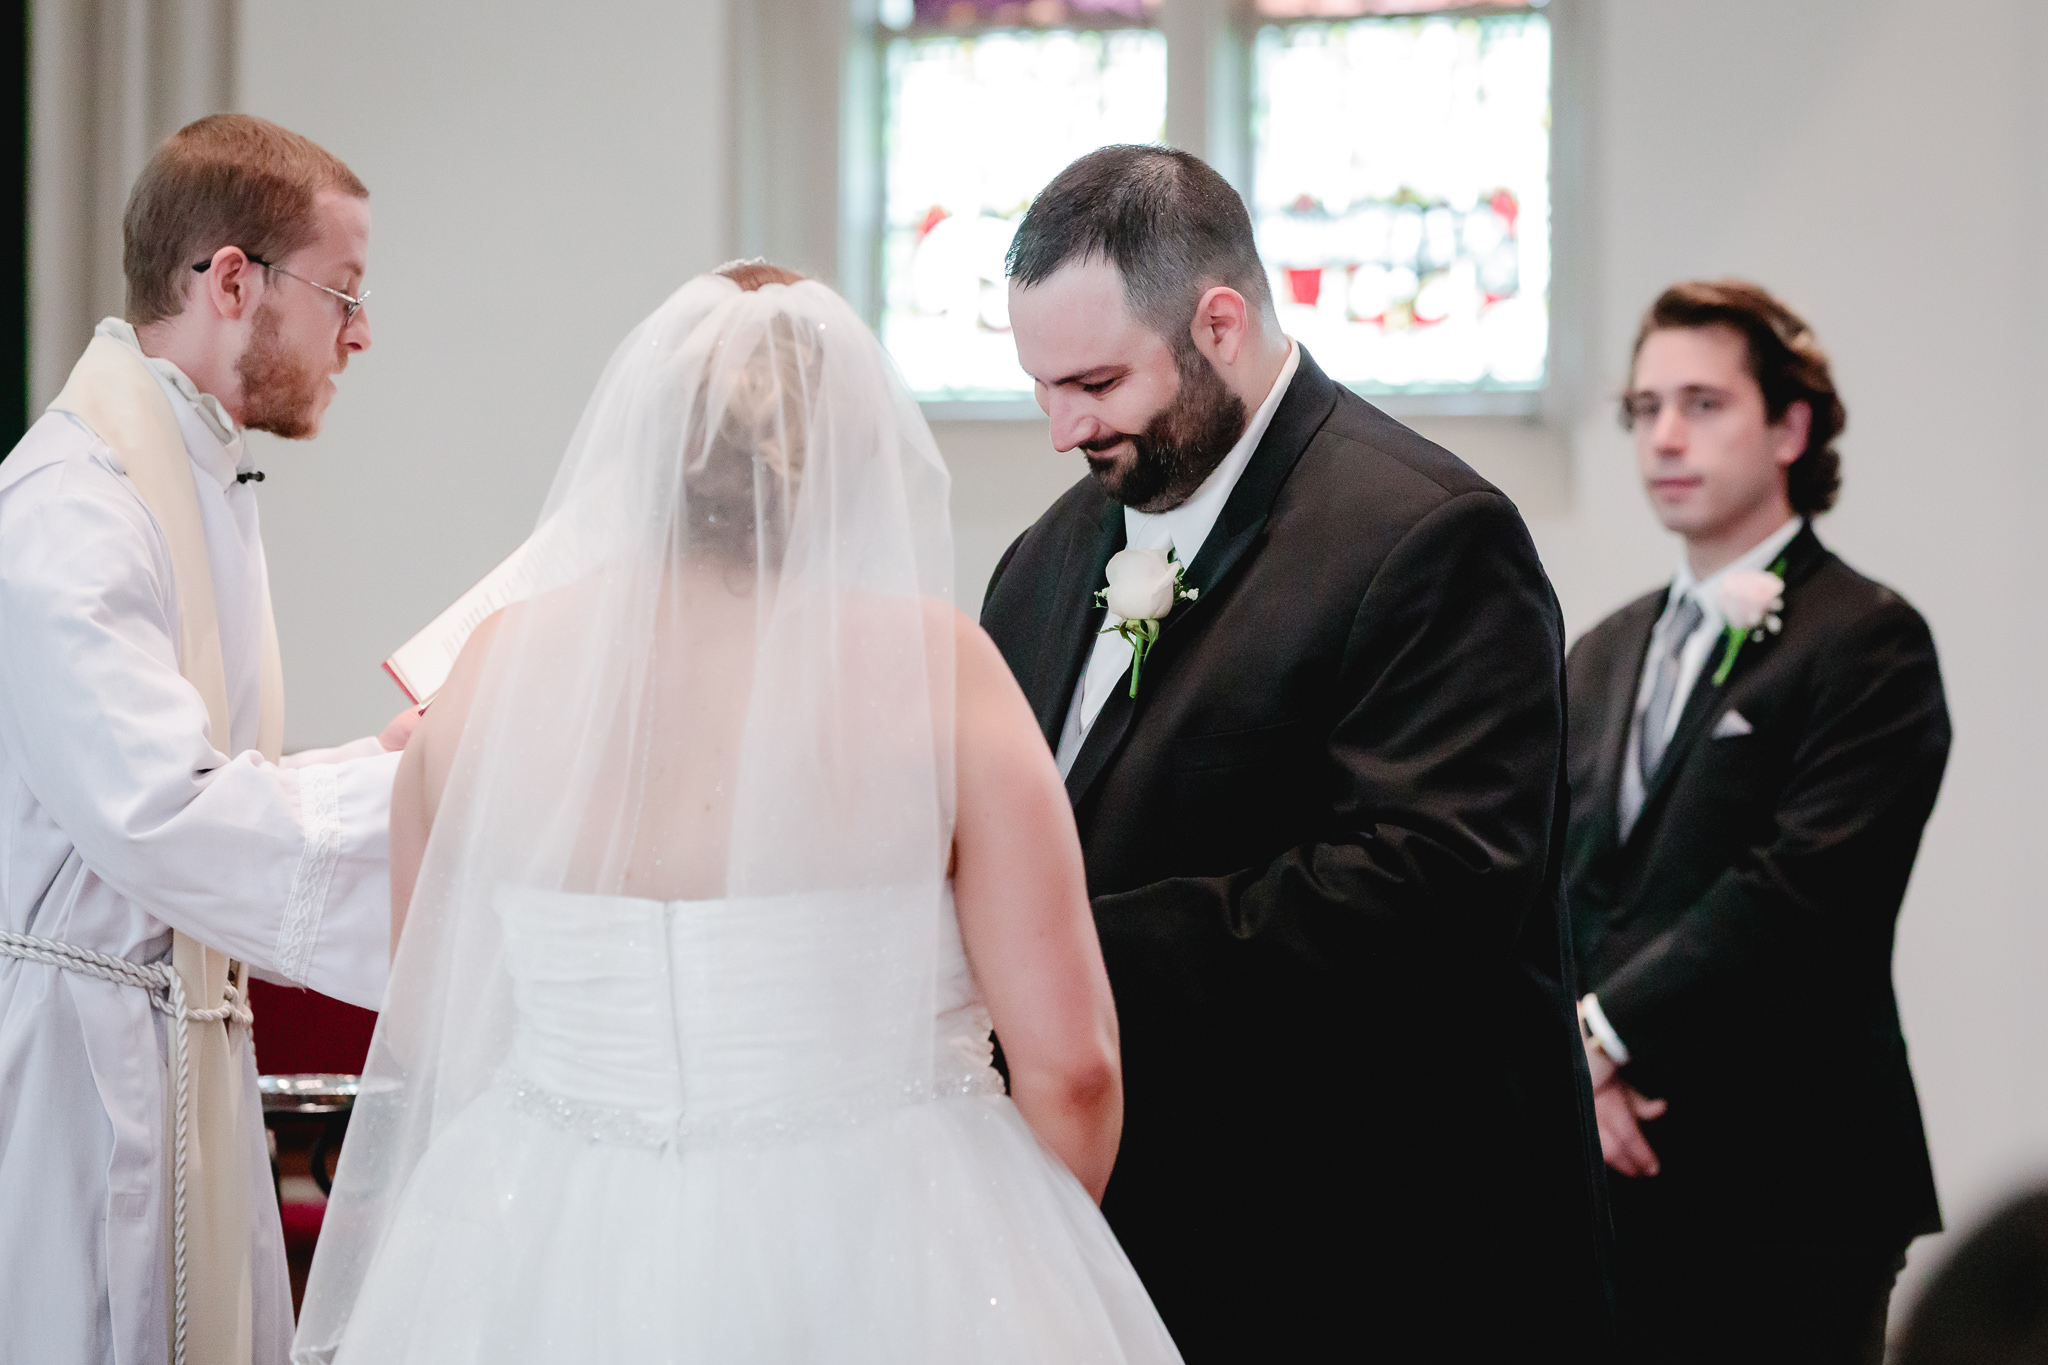 Groom puts a ring on his bride's finger at their Duquesne University wedding ceremony